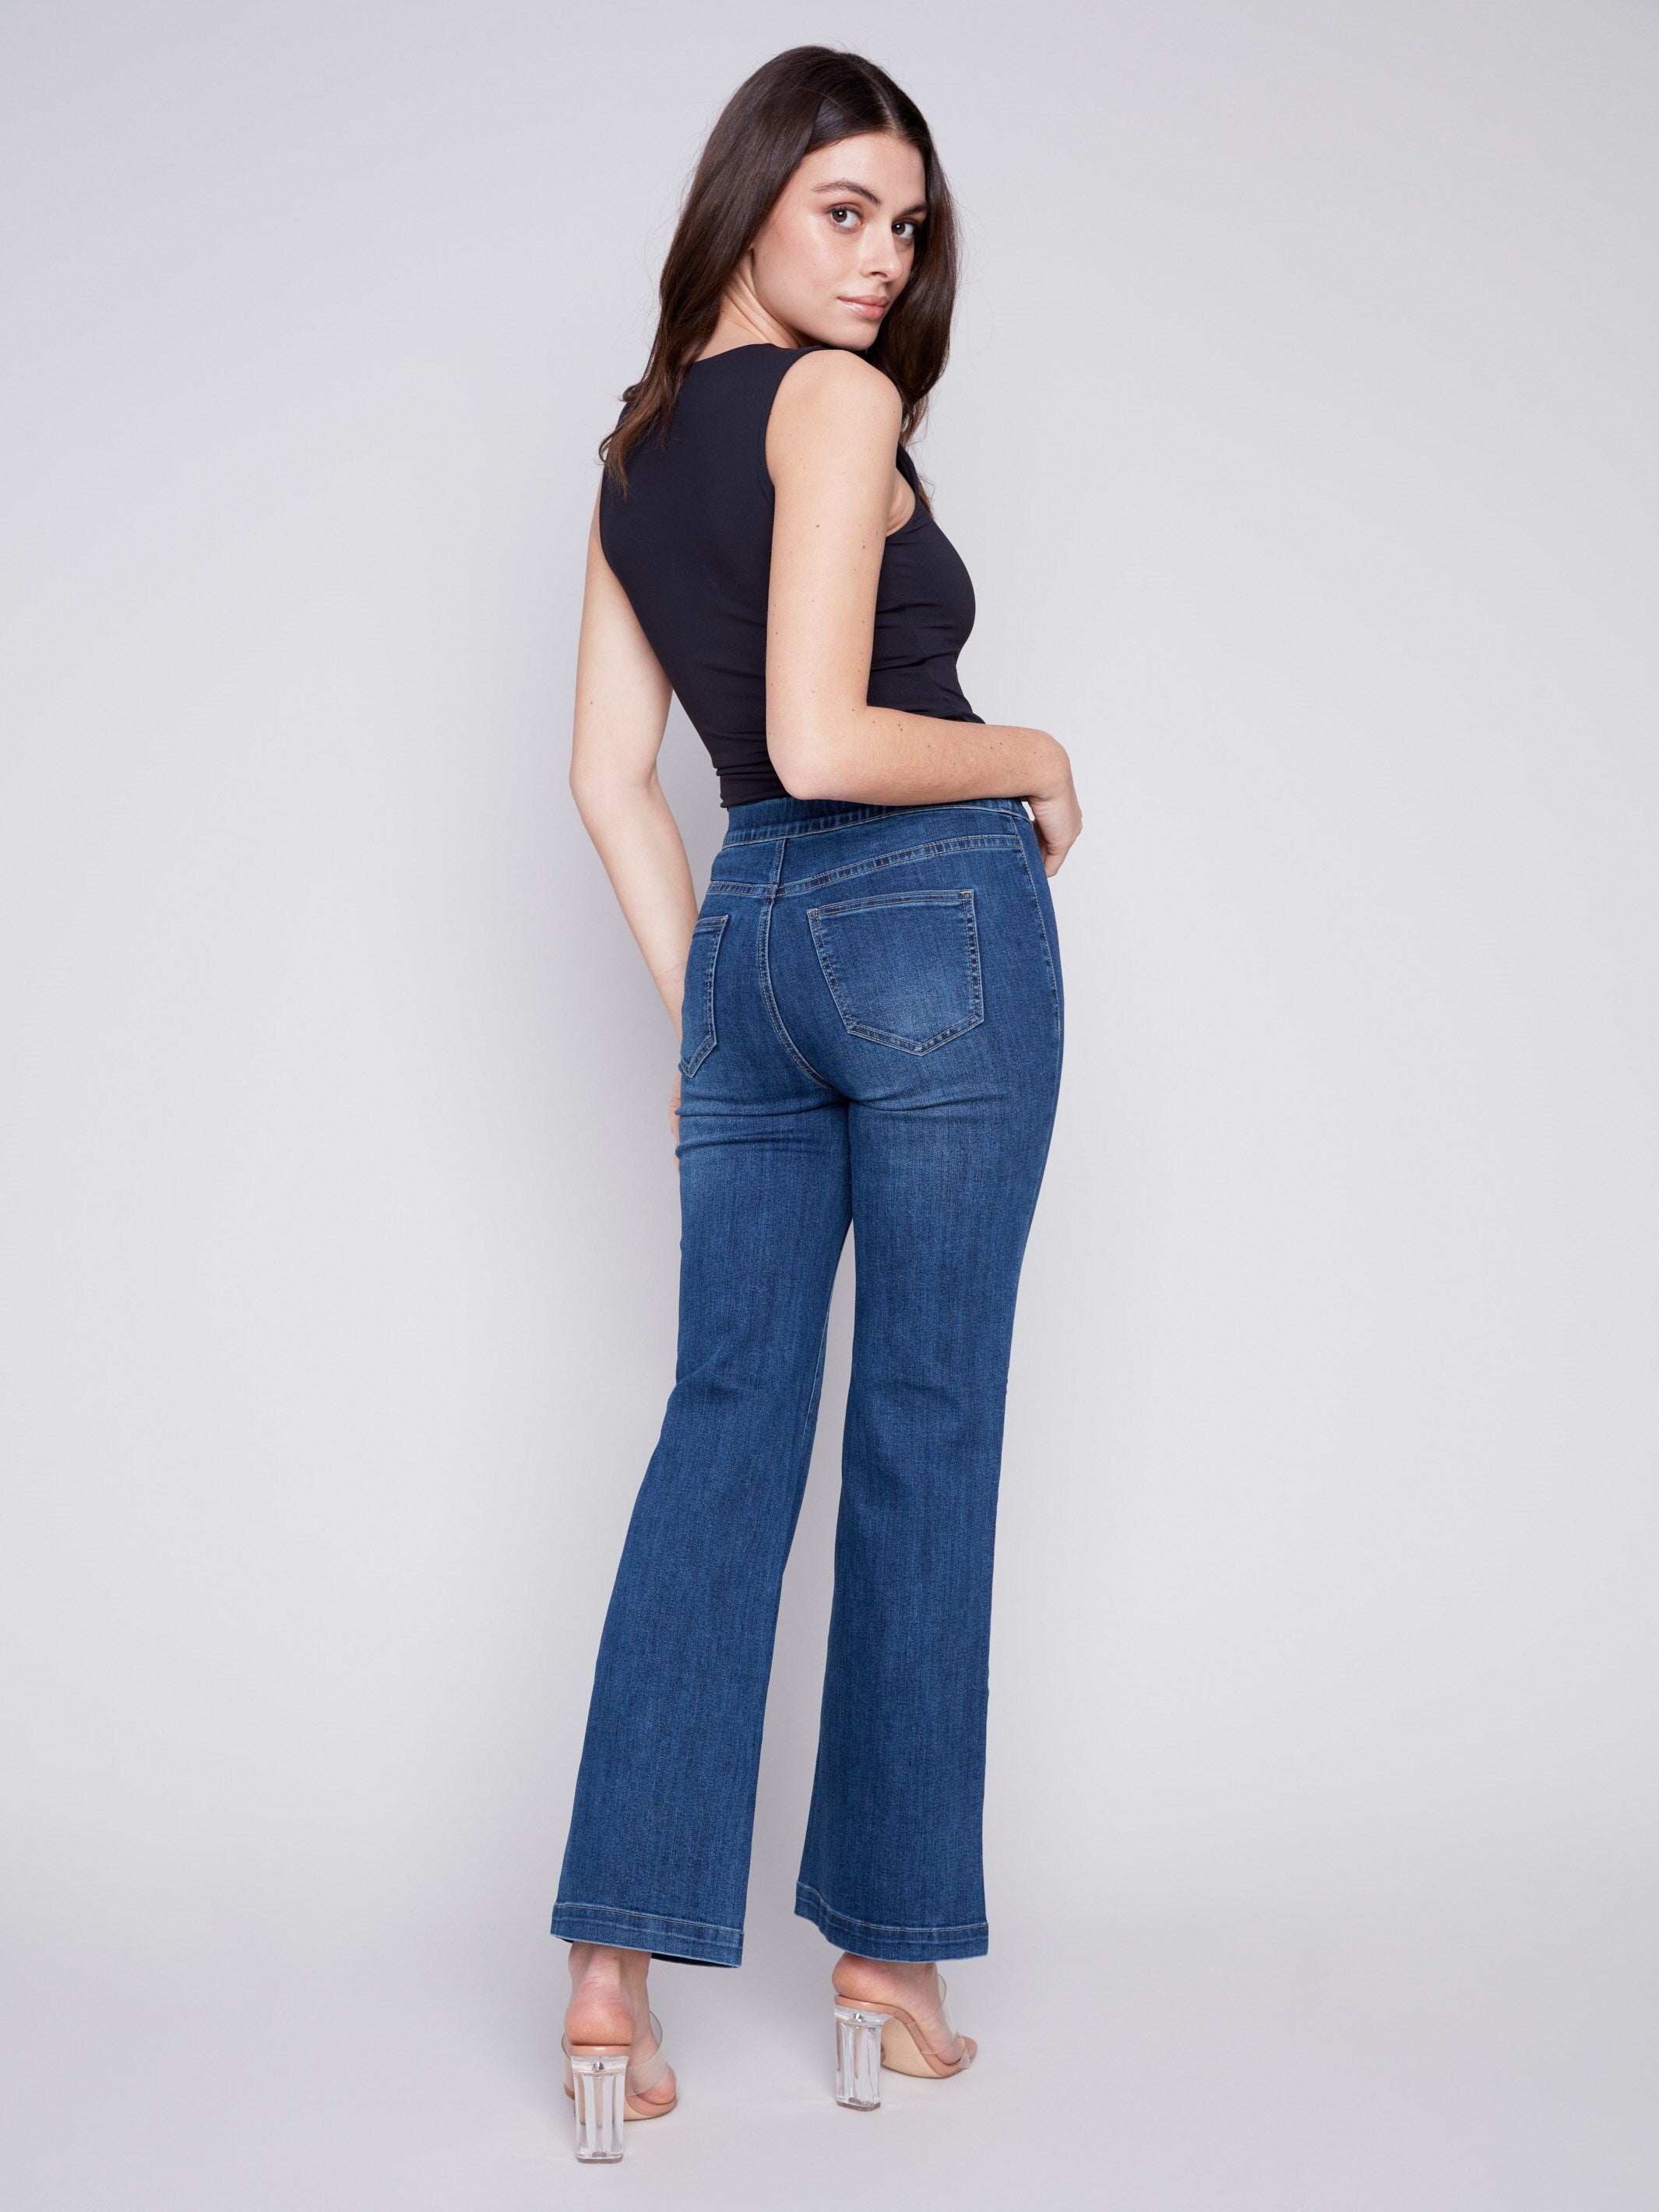 Flare Jeans with Decorative Buttons - Indigo - Charlie B Collection Canada - Image 4